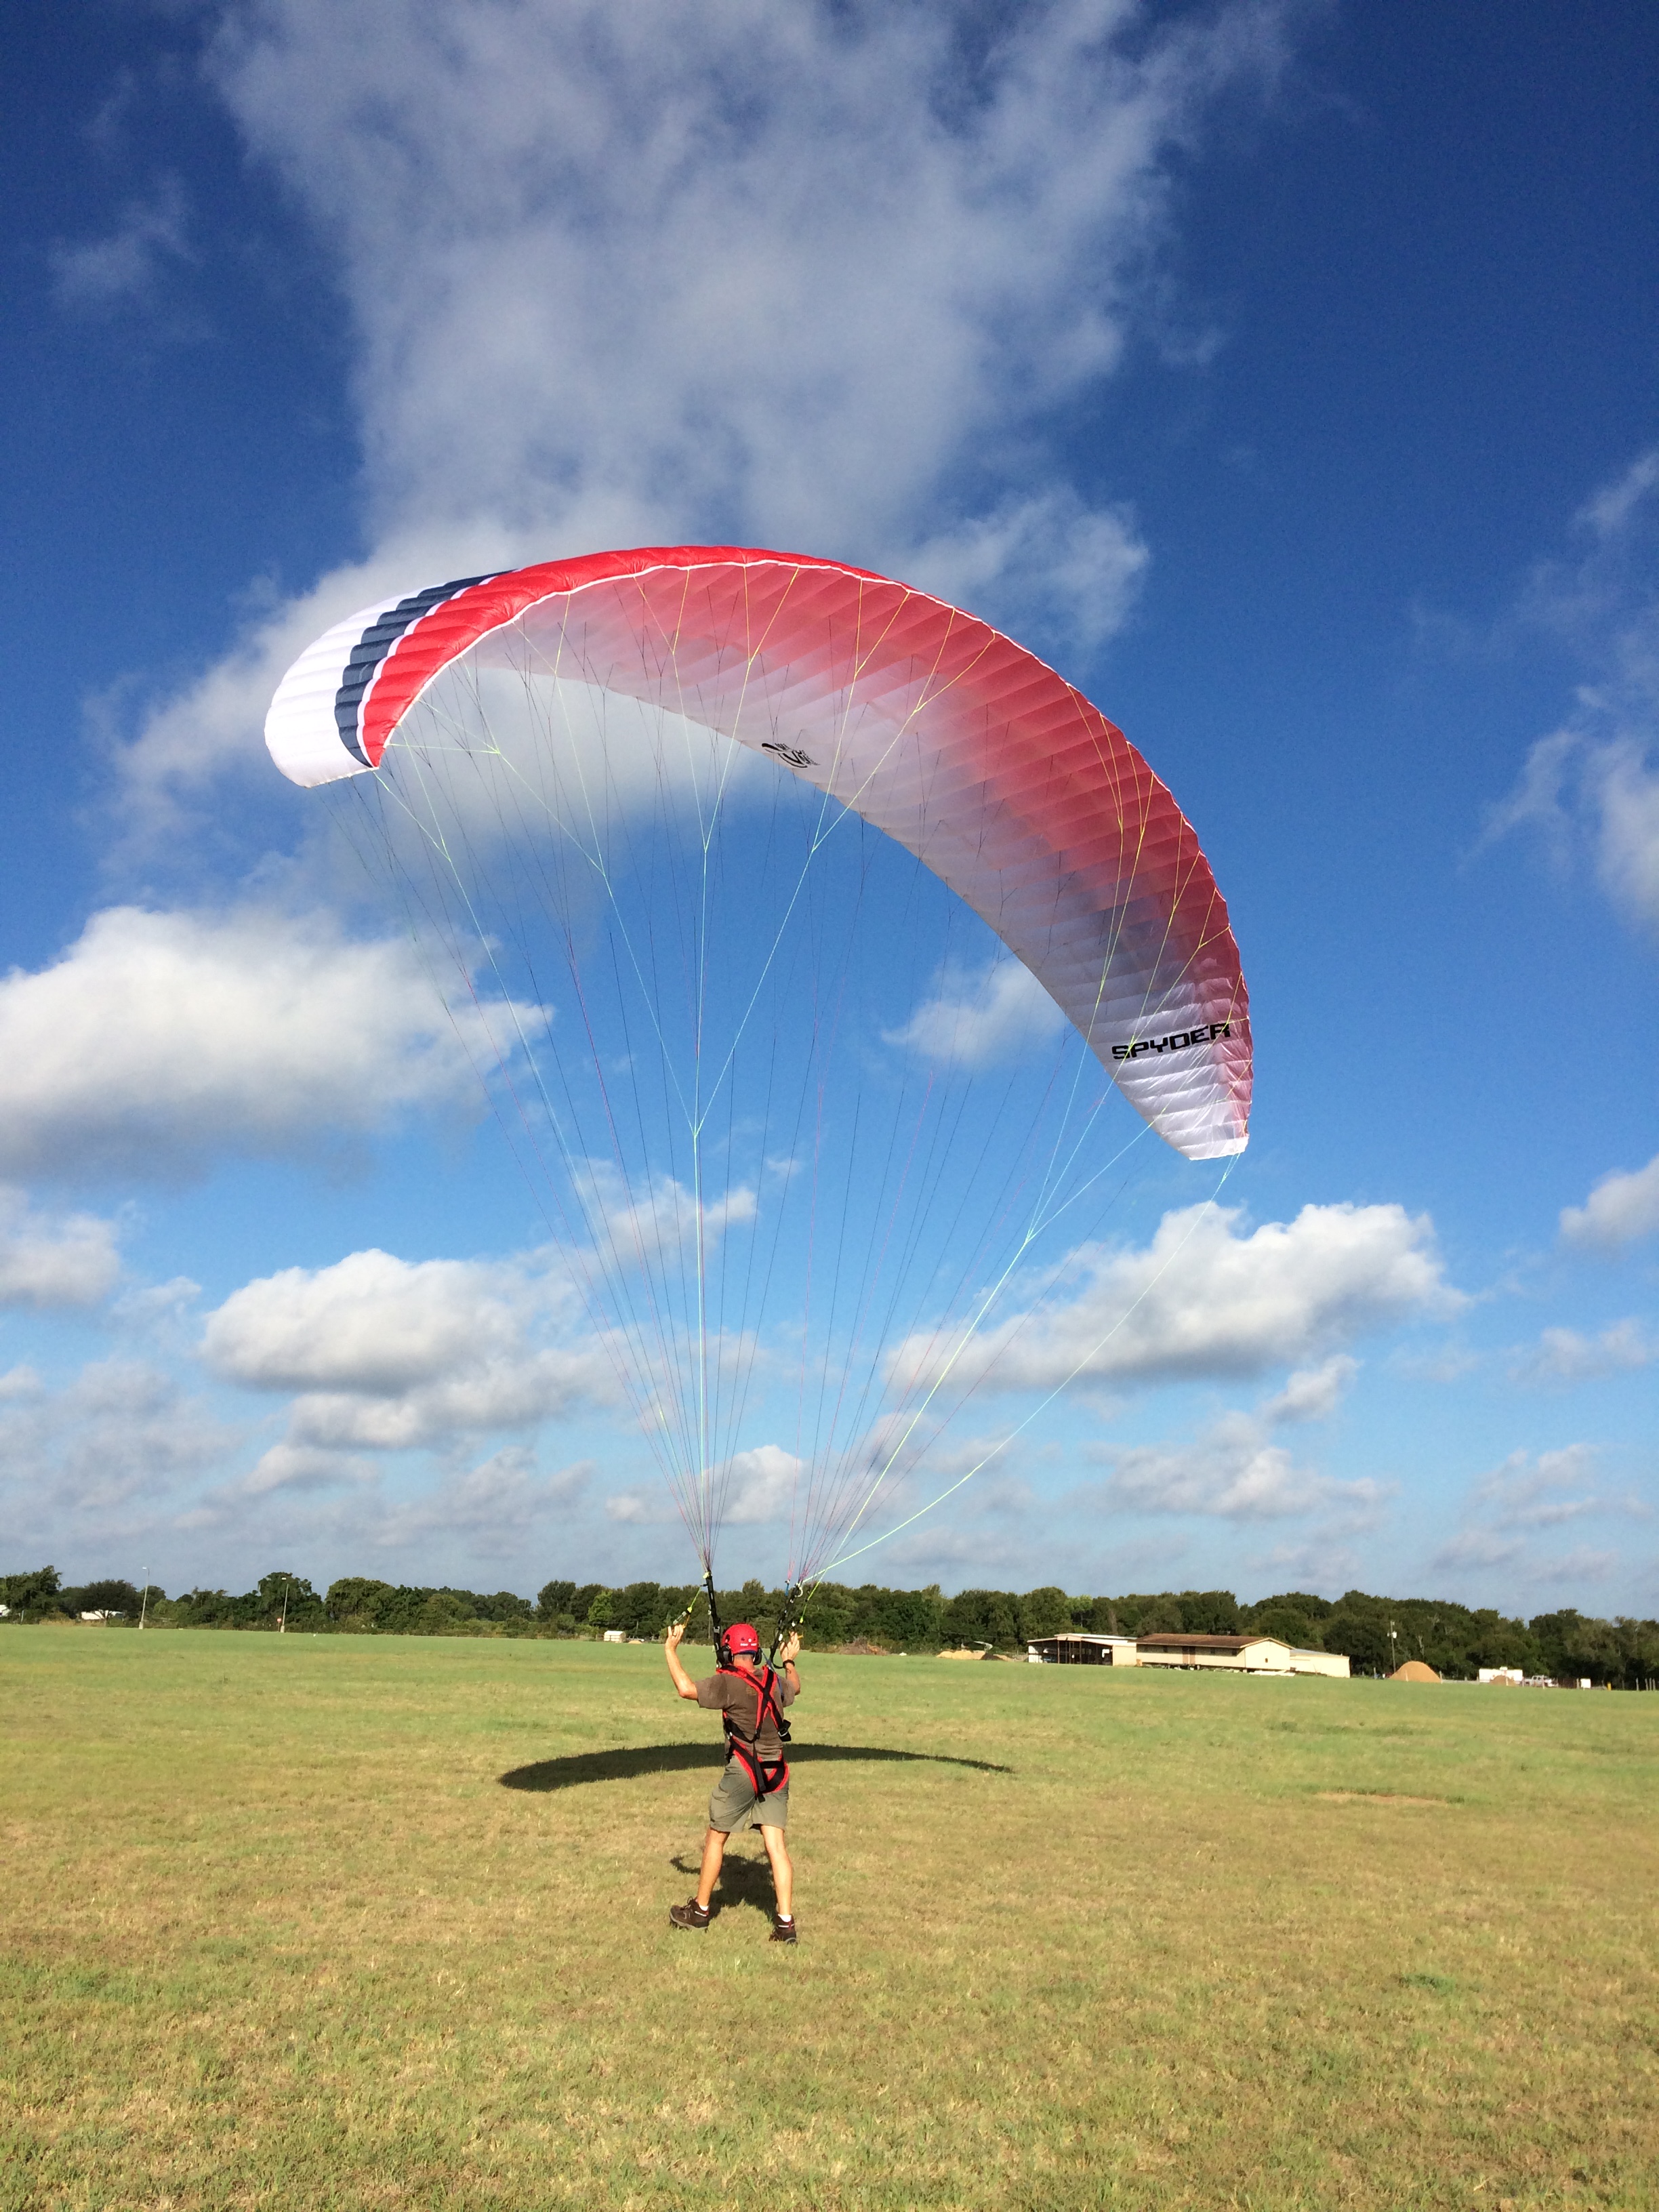 Kiting practice with harness